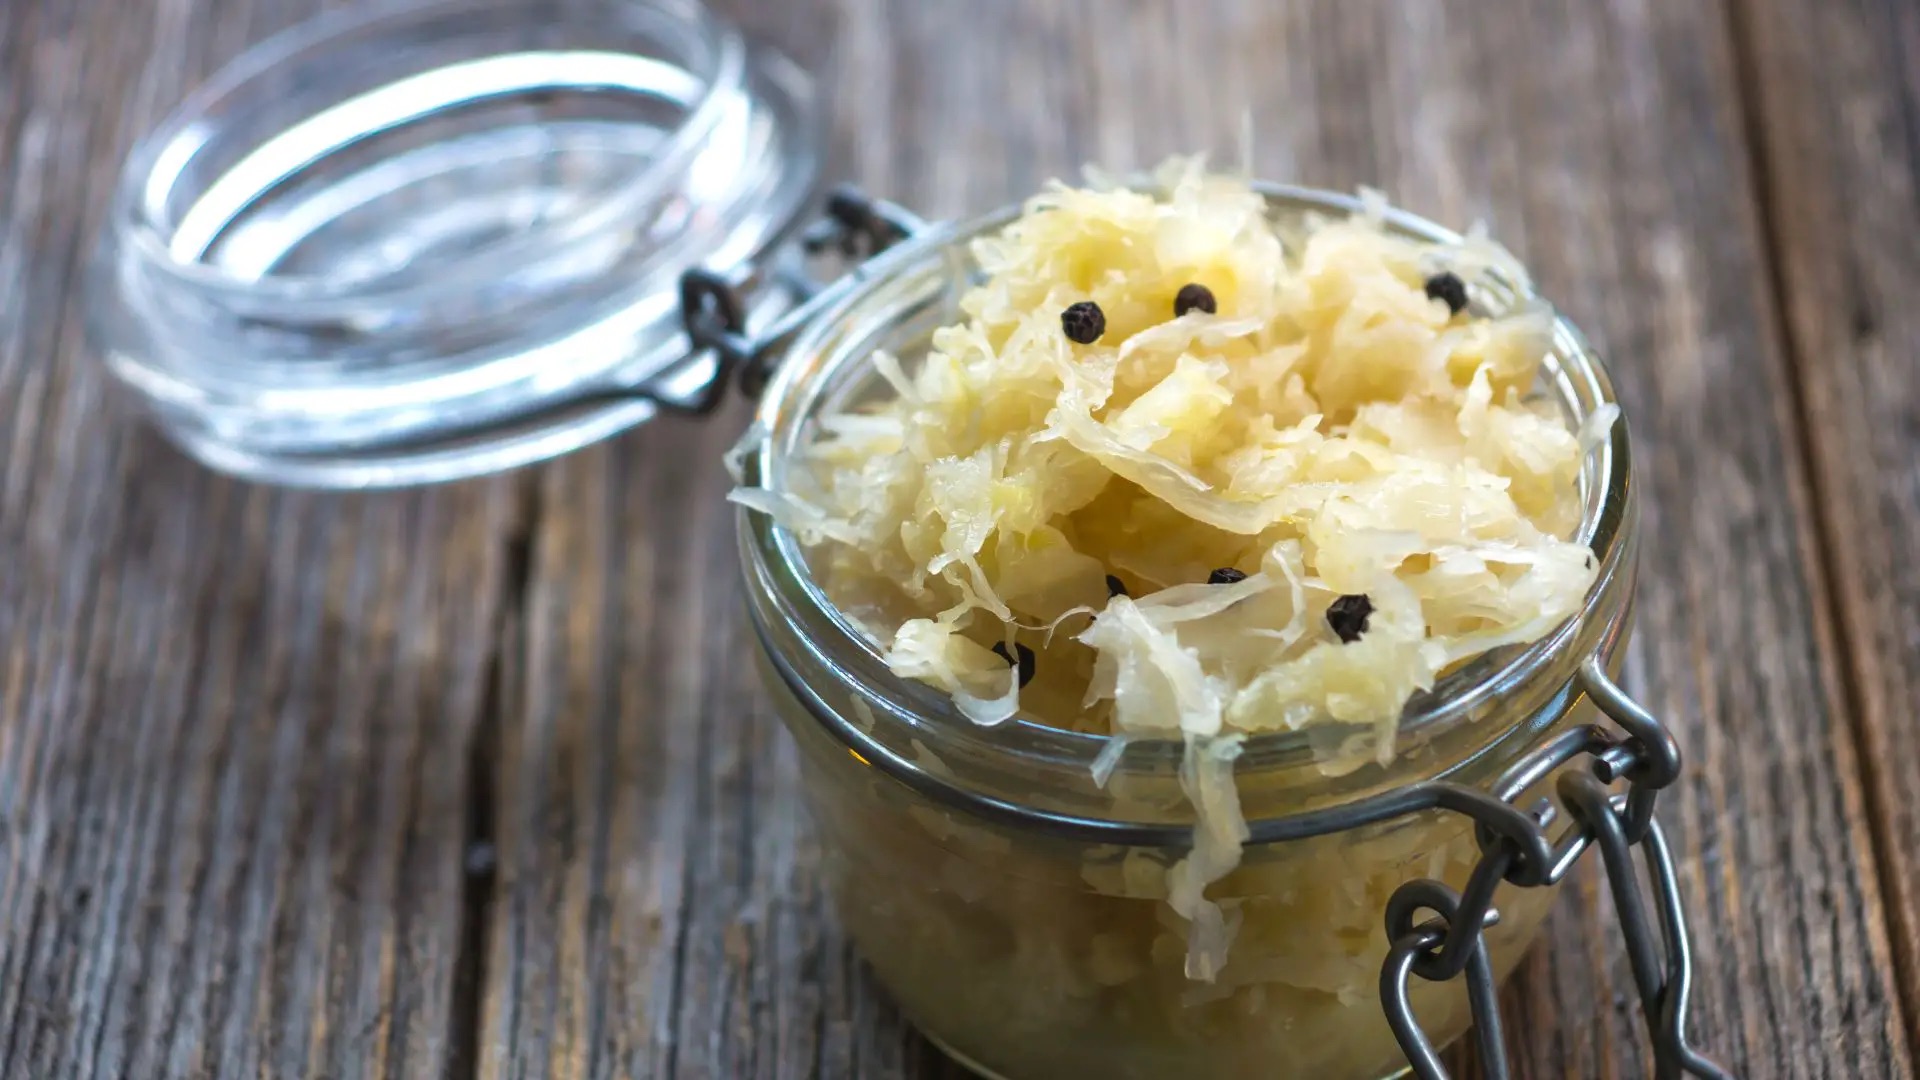 How Long Does Sauerkraut Last In The Refrigerator